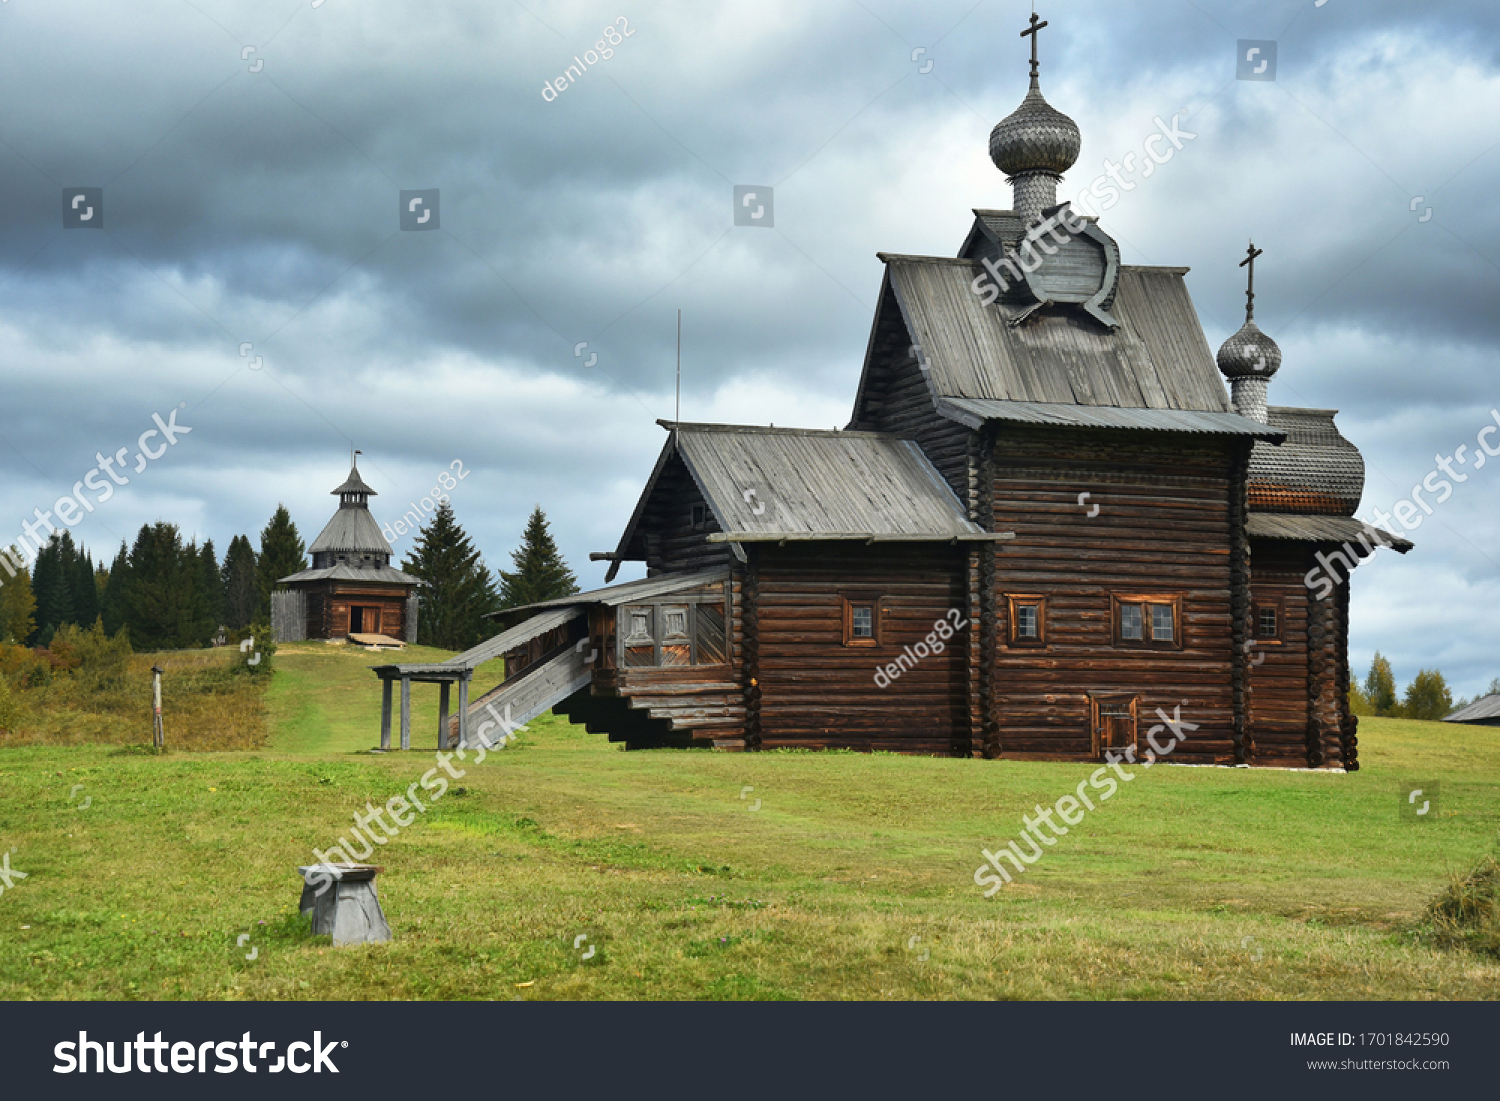 Khokhlovka Park and the Museum of Wooden Architecture in the open. Russia #1701842590